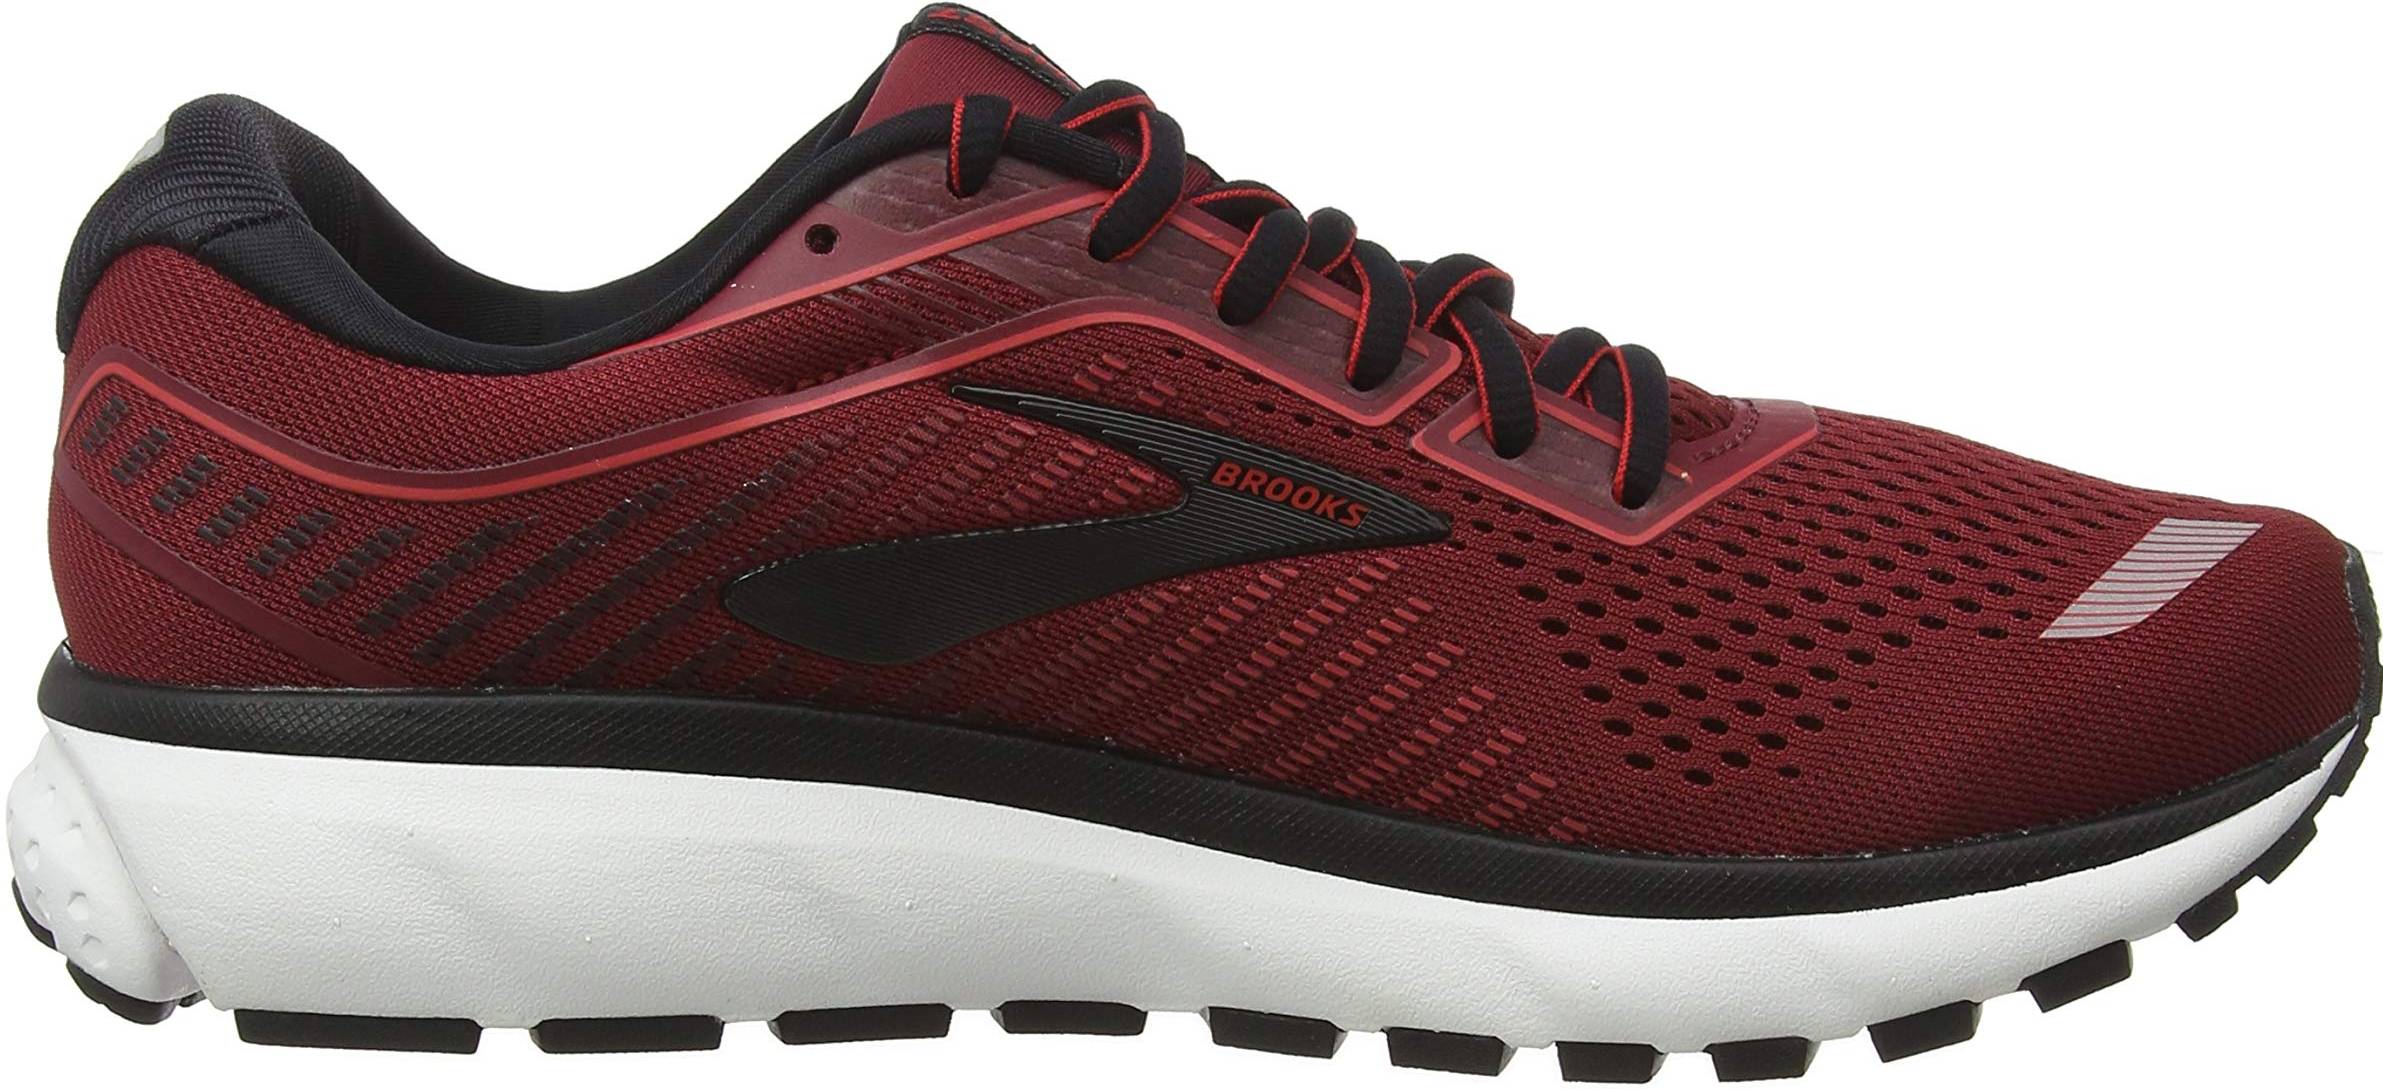 which brooks shoe is best